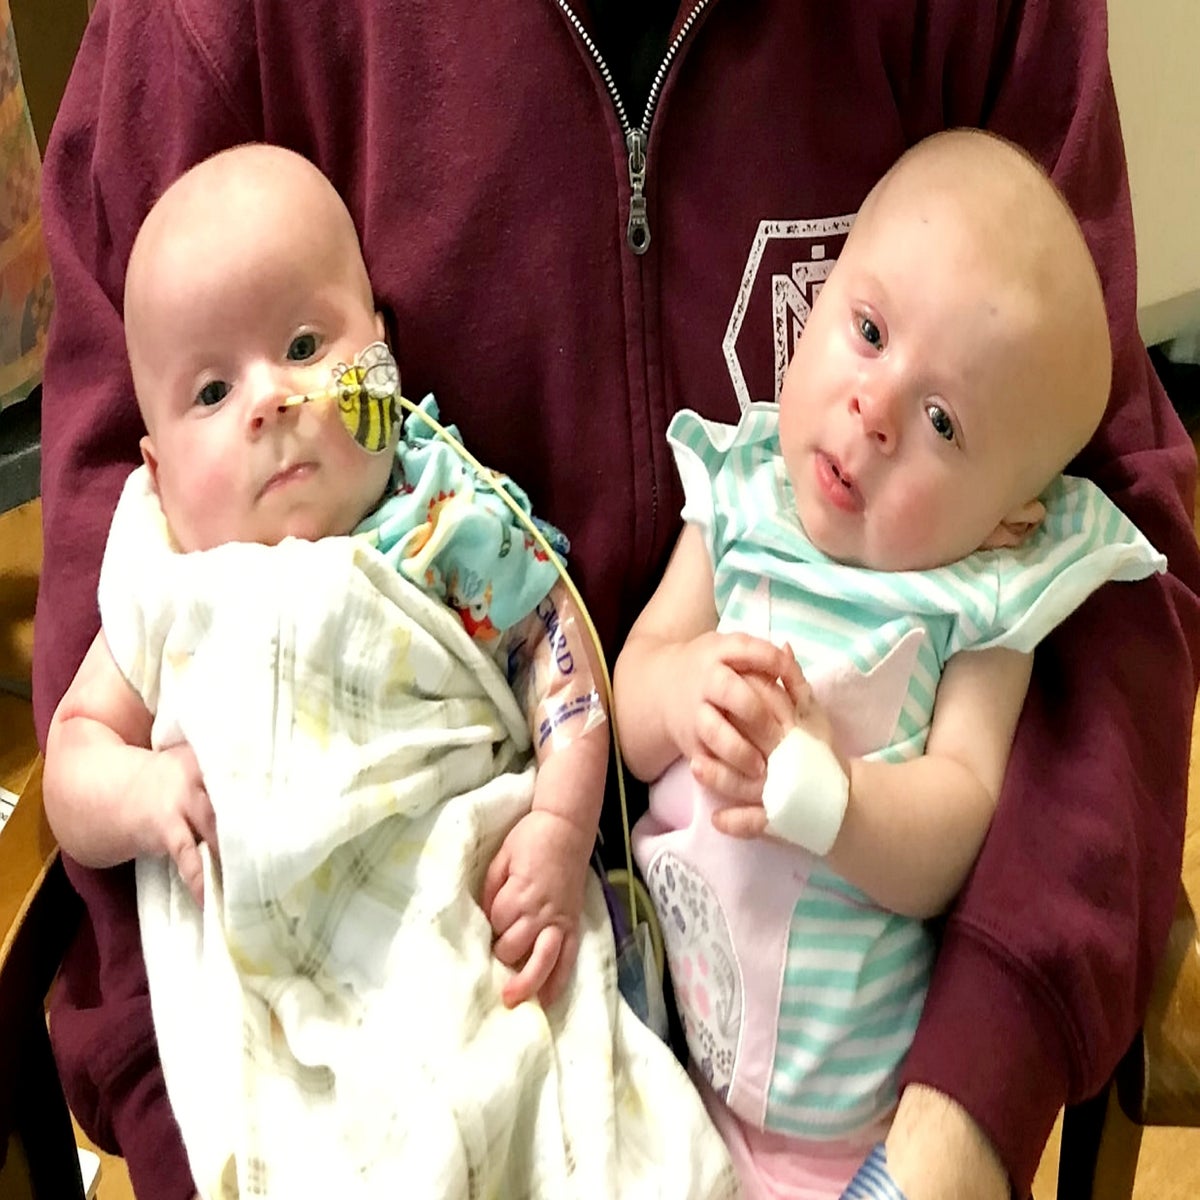 Bilateral retinoblastoma: Mother left heartbroken after twin daughters both  diagnosed with rare eye cancer | The Independent